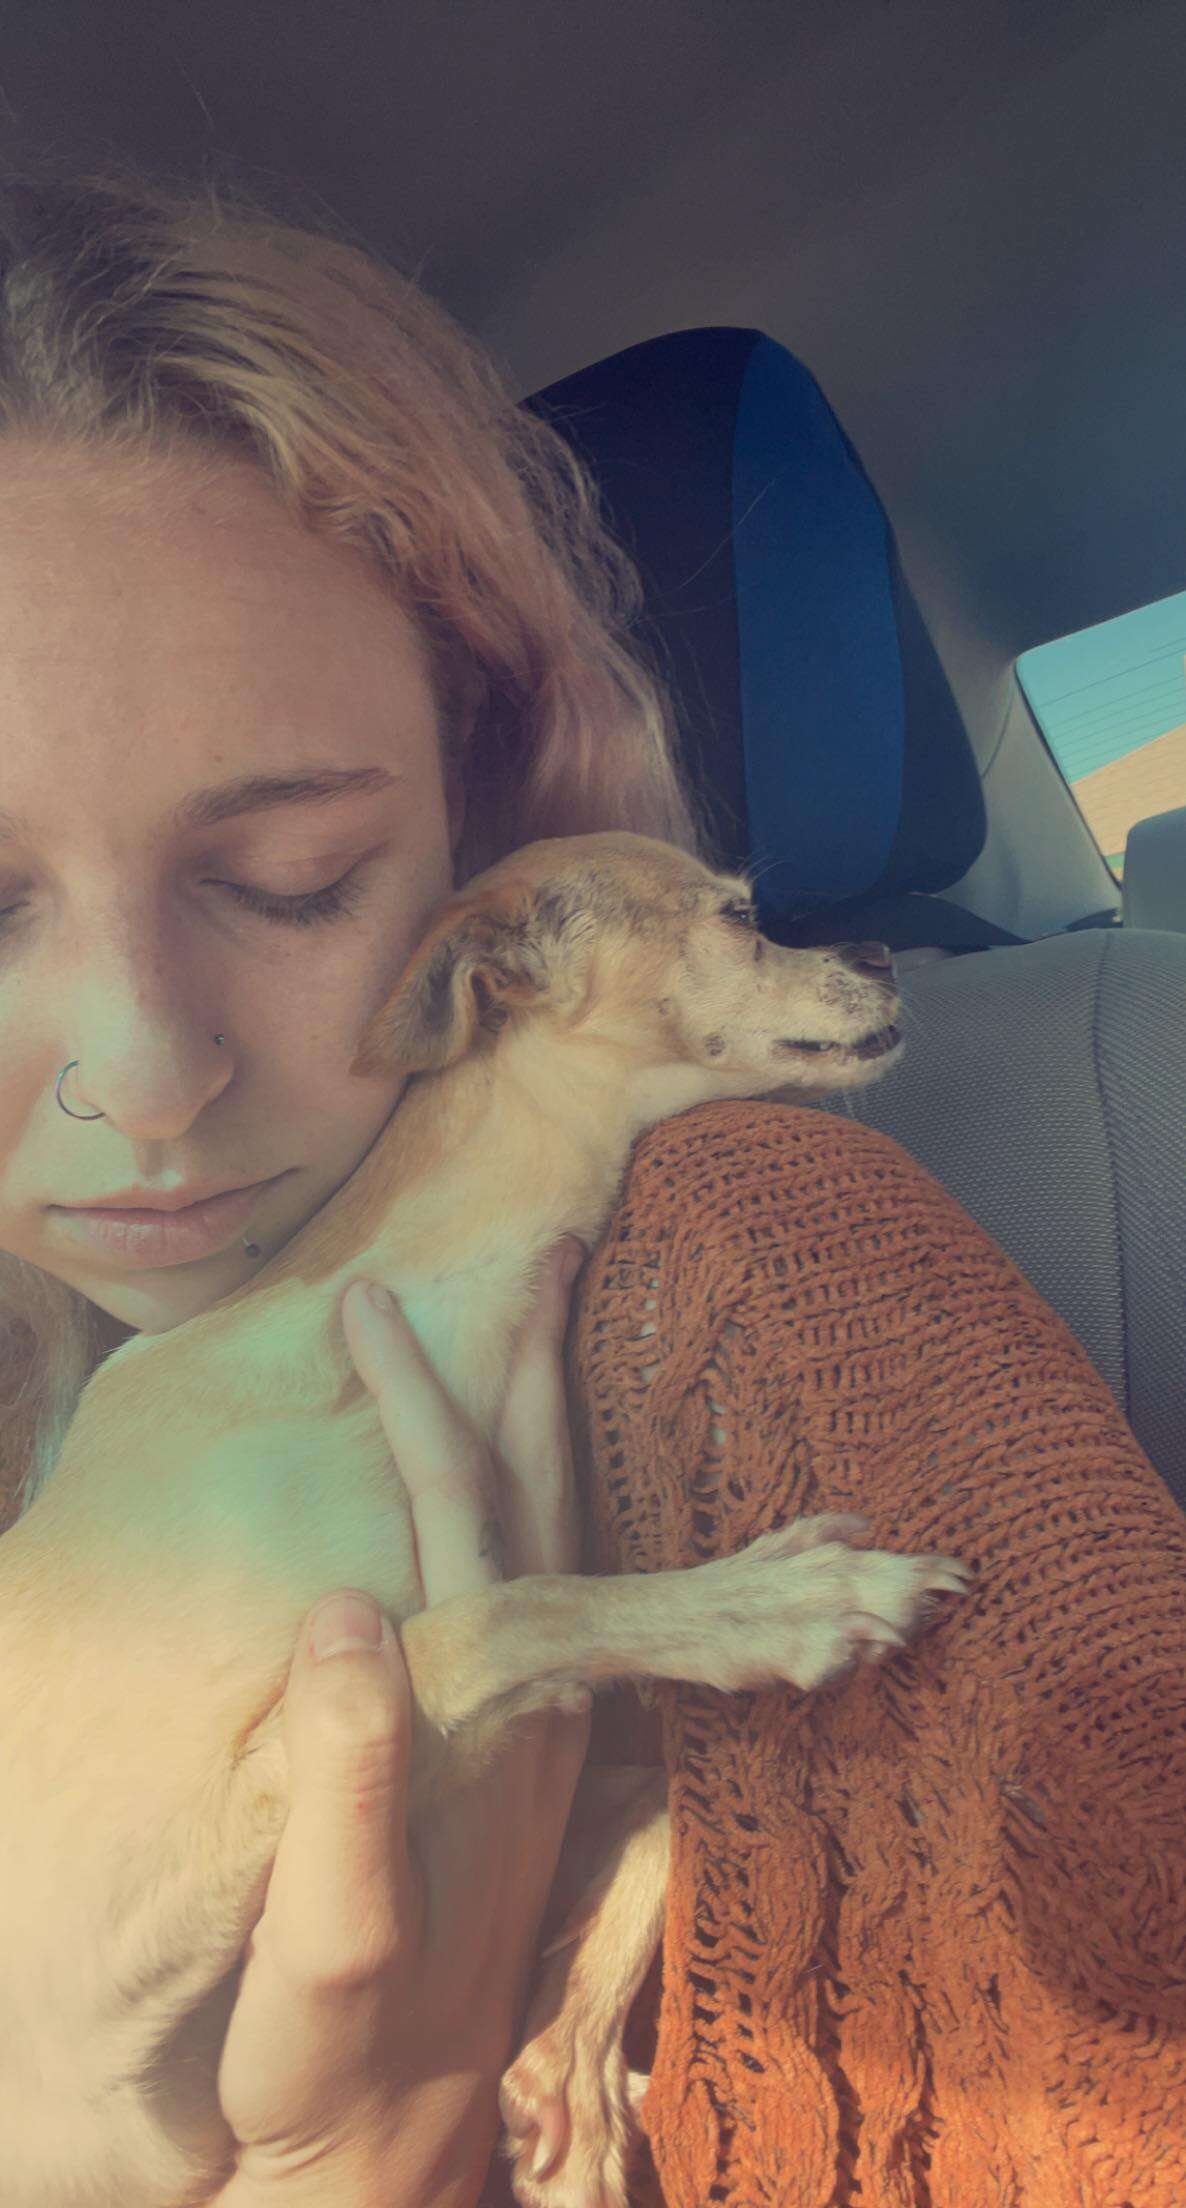 Woman reunites with dog she thought passed away 2 years ago